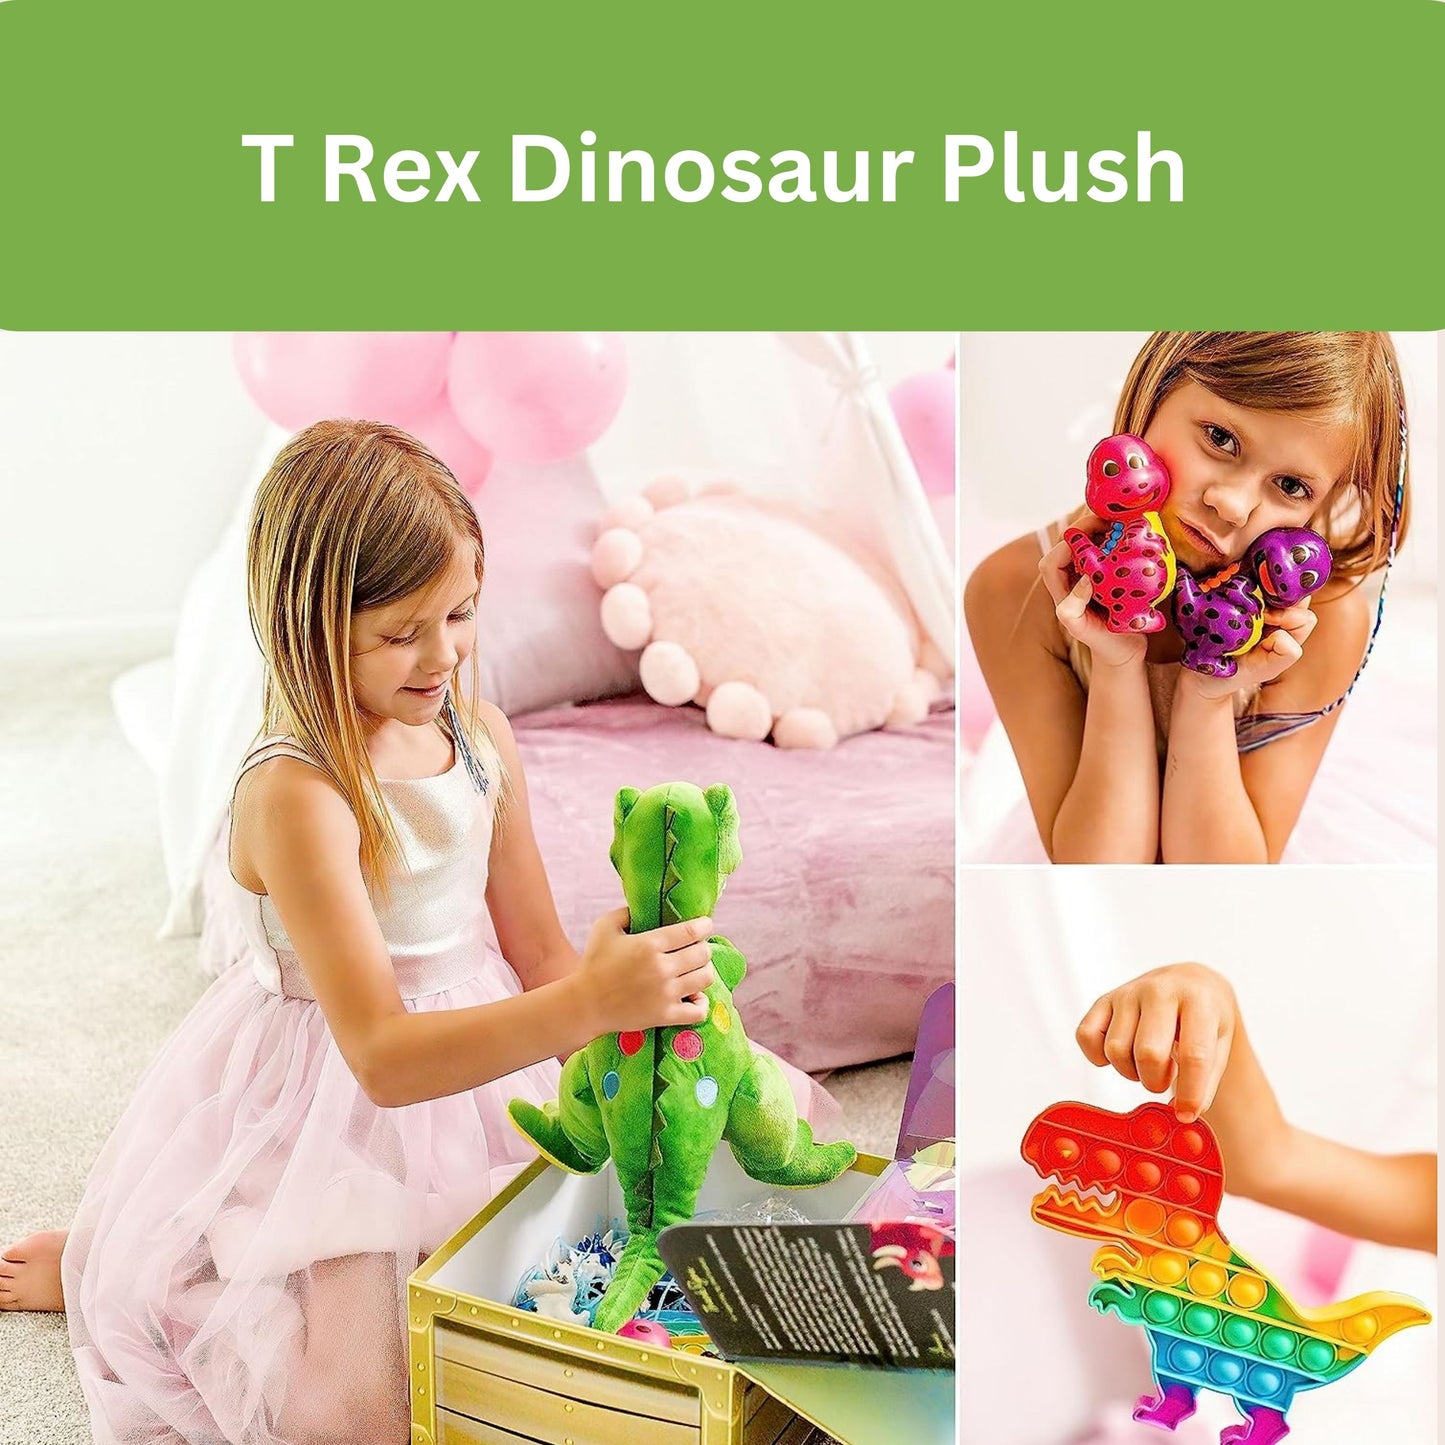 STEM-Accredited Dinosaur Giftset - A Surprise Gift for Boys Complete w/T-Rex Dinosaur Plush, Dinosaur Pullback Cars, Dinosaur Painting Kit, Squishies, Pop It & More